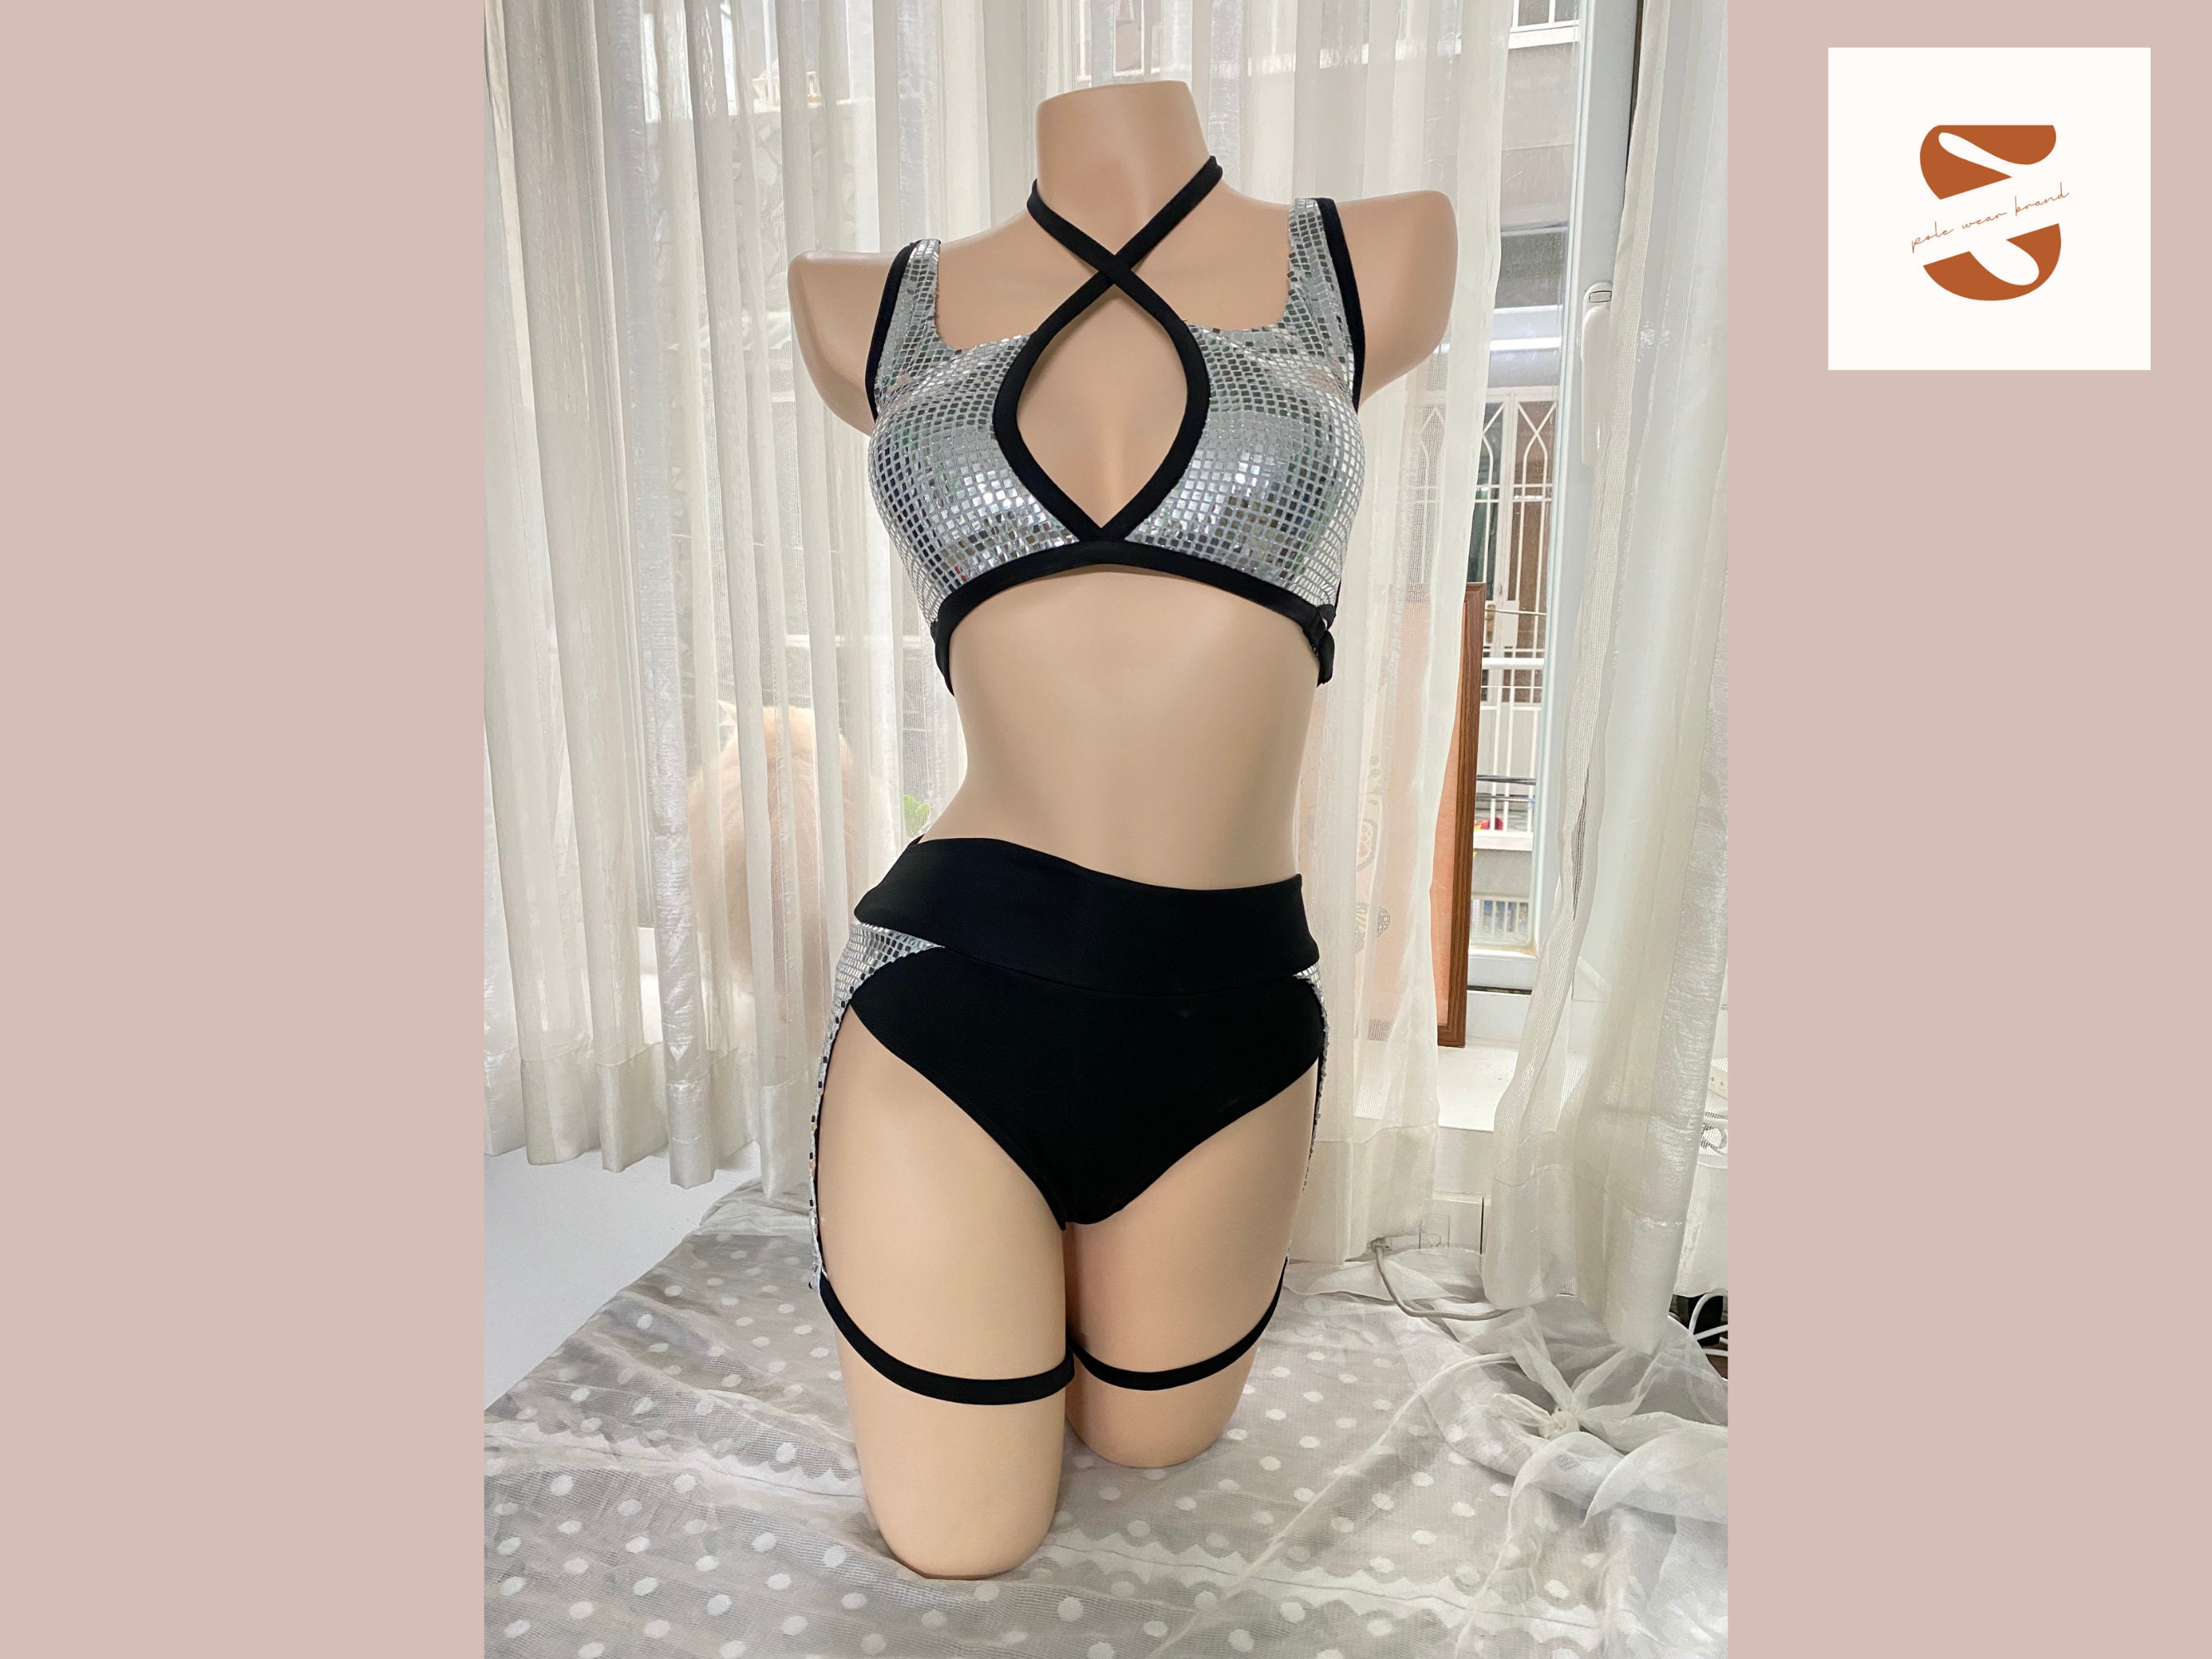 Pole Dance Costume, Pole wear, Dance Costume, pole dance wear, pole dance,  pole shorts, pole sets, pole clothings, Pole outfit